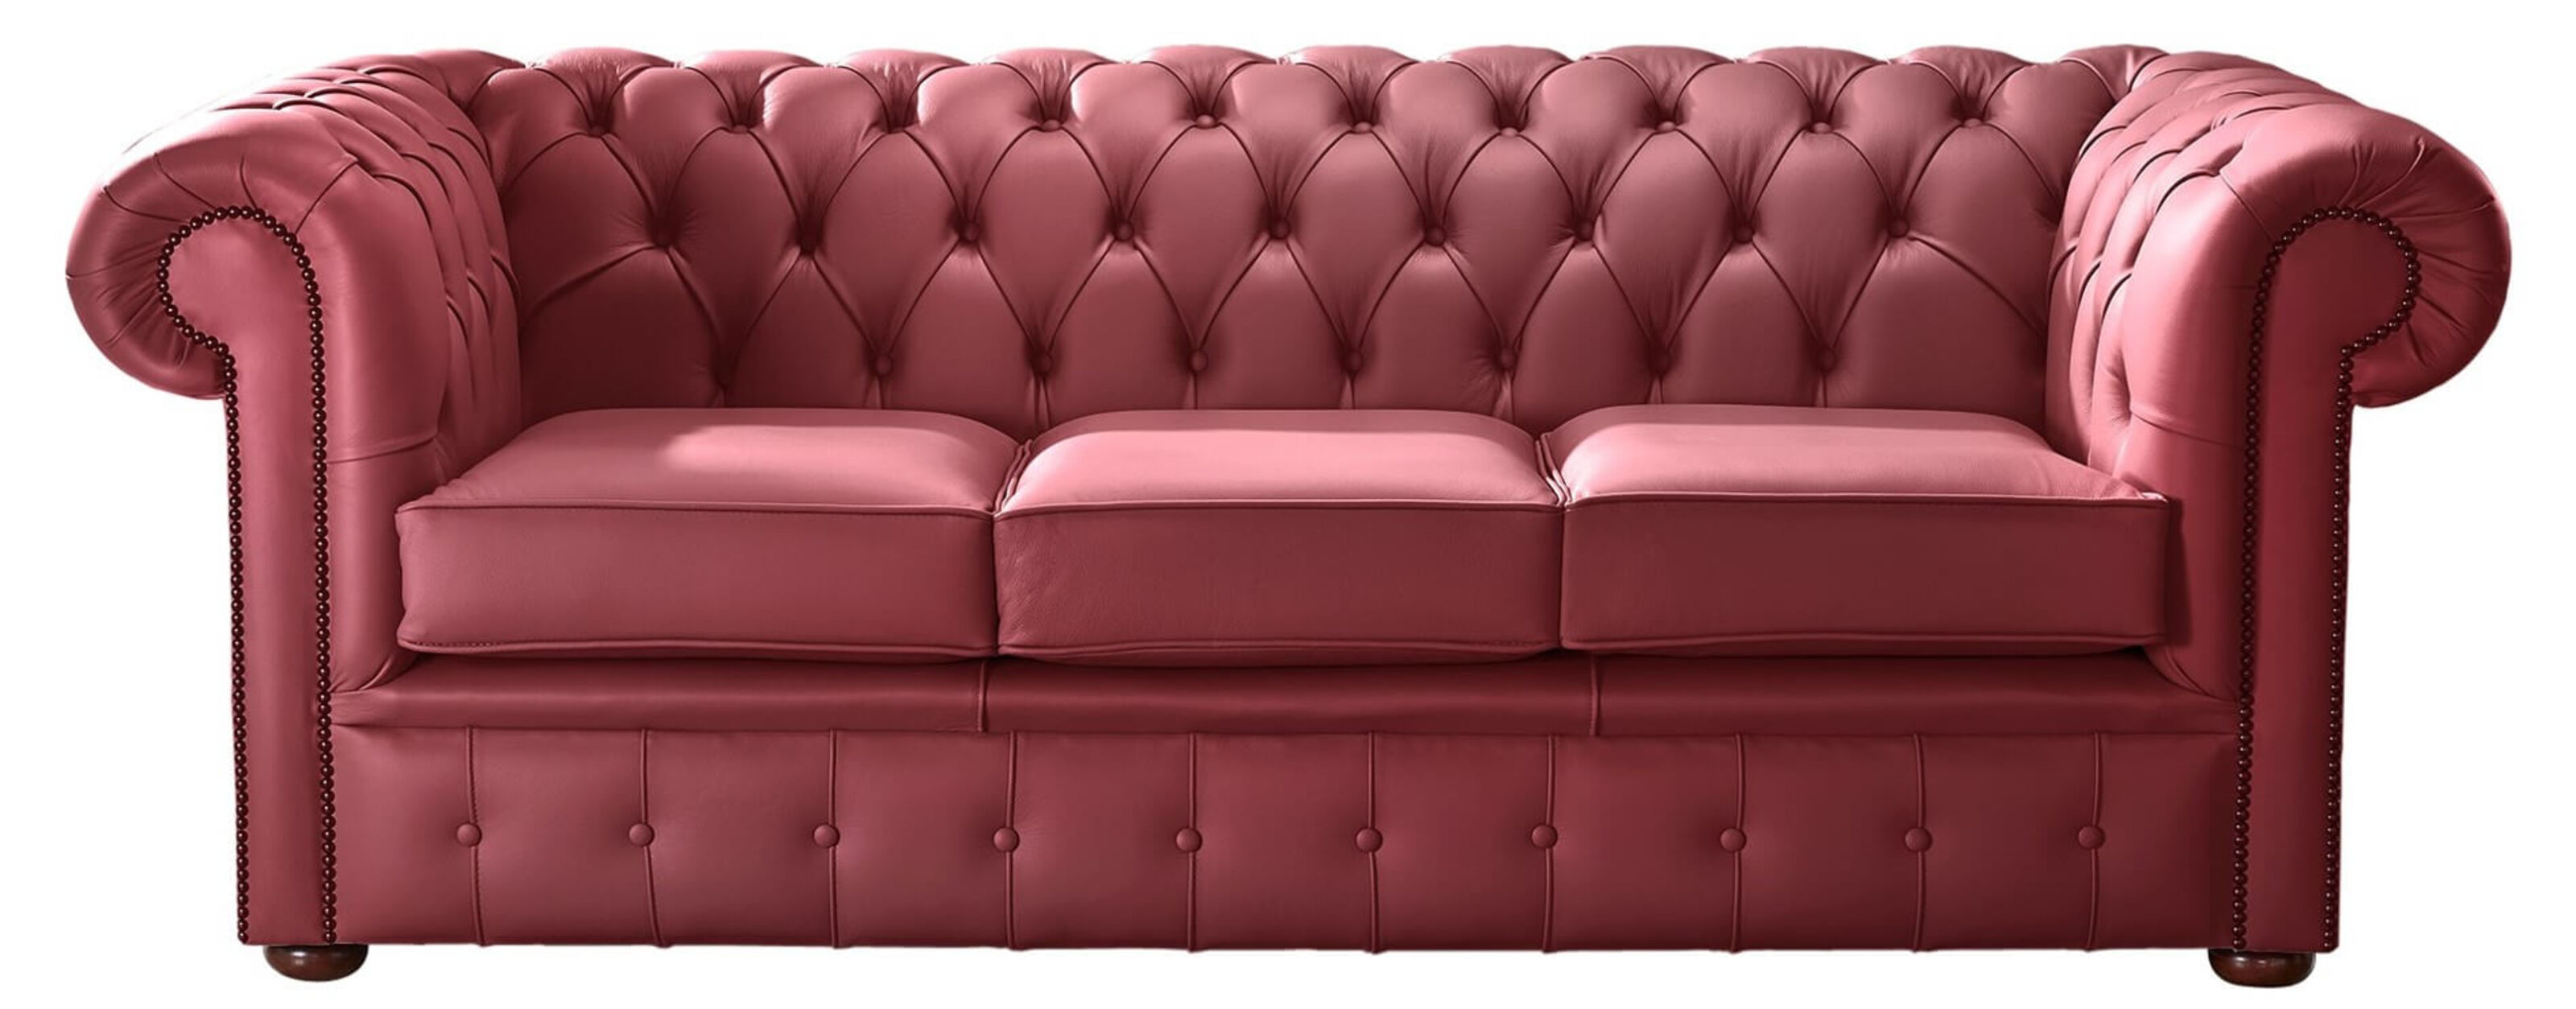 Classic Comfort in Brisbane Chesterfield Sofa Selections  %Post Title